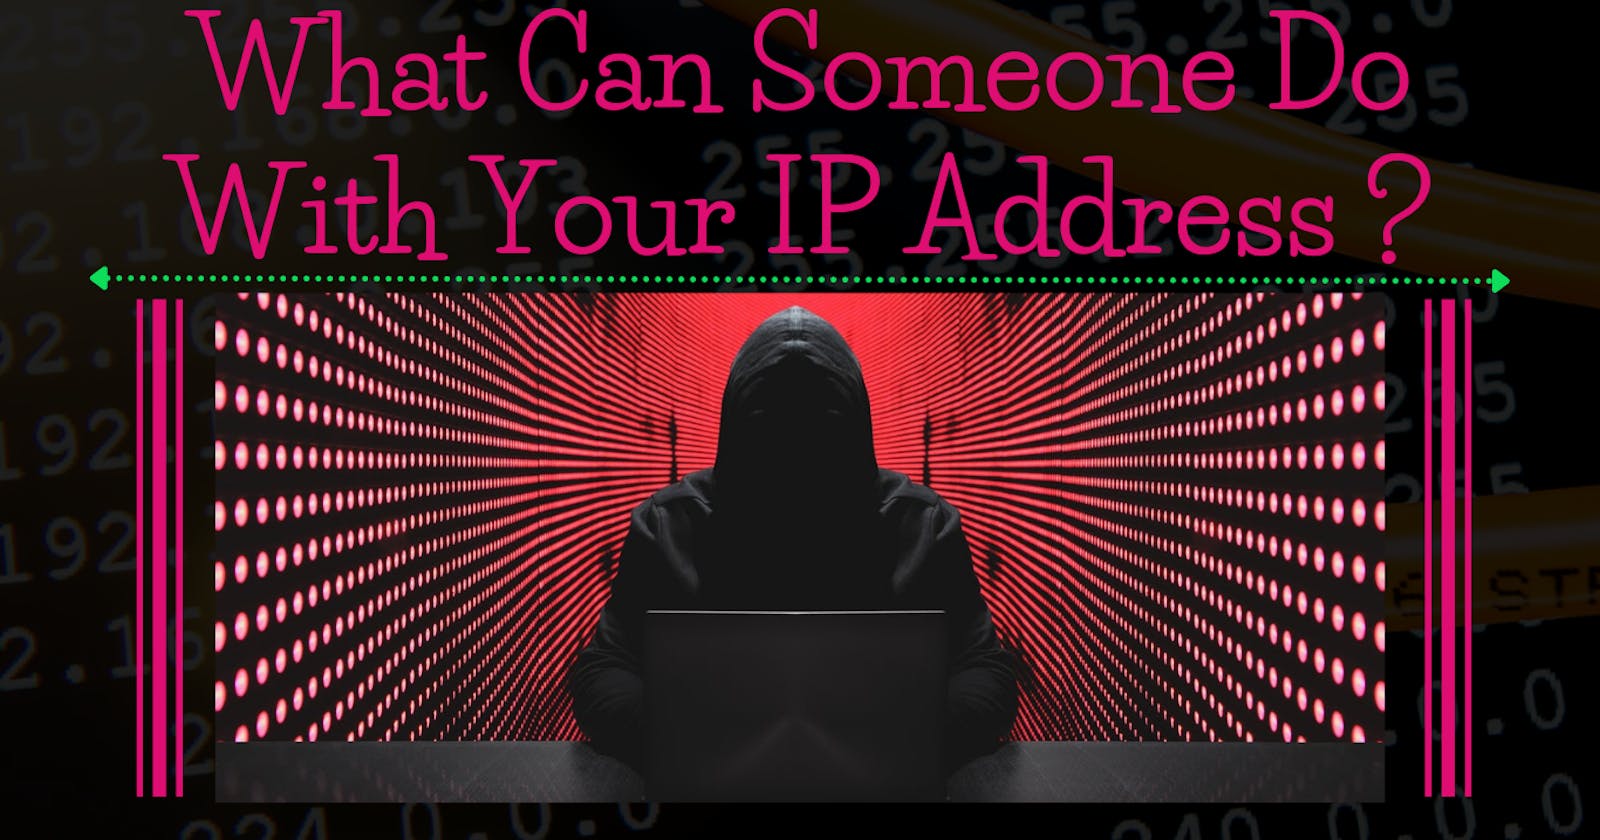 What Can Someone Do With Your IP Address?